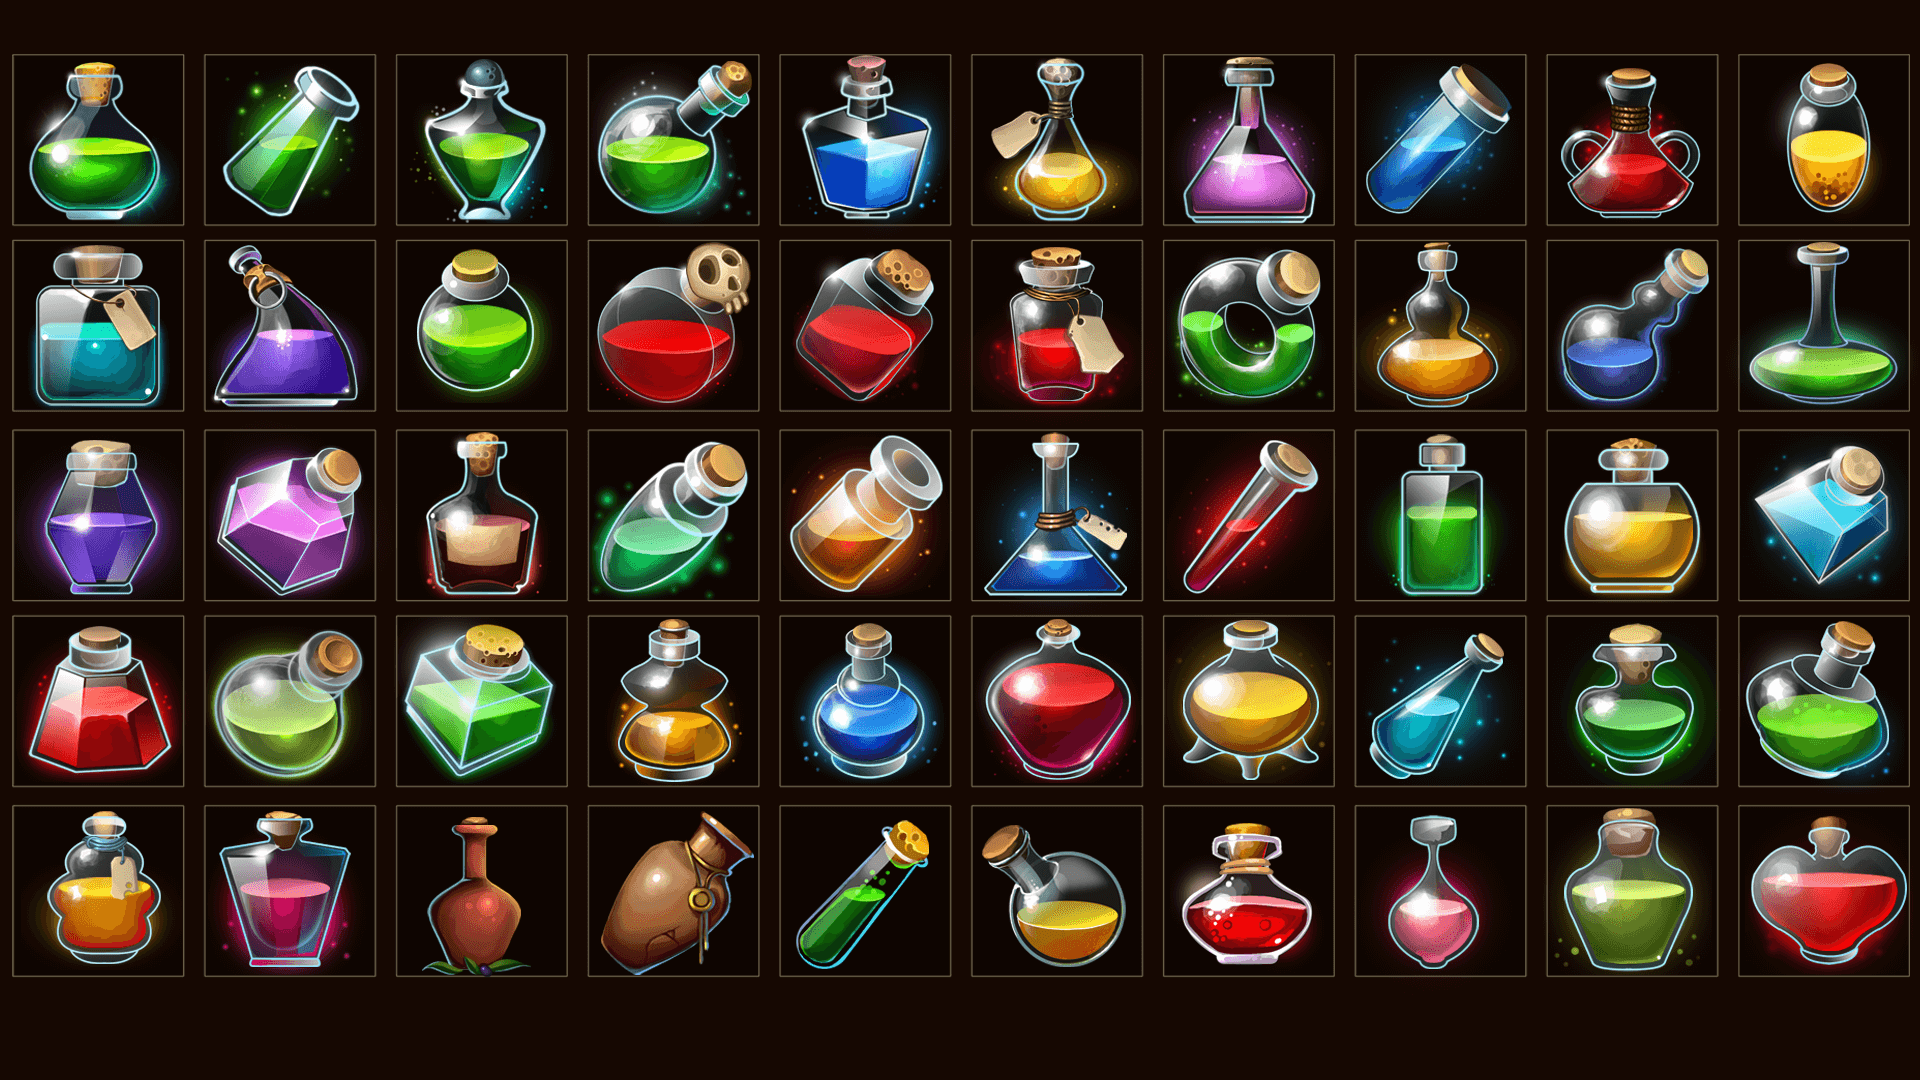 Beverage, drink, game, healing, hp, potion, recovery icon | Icon 